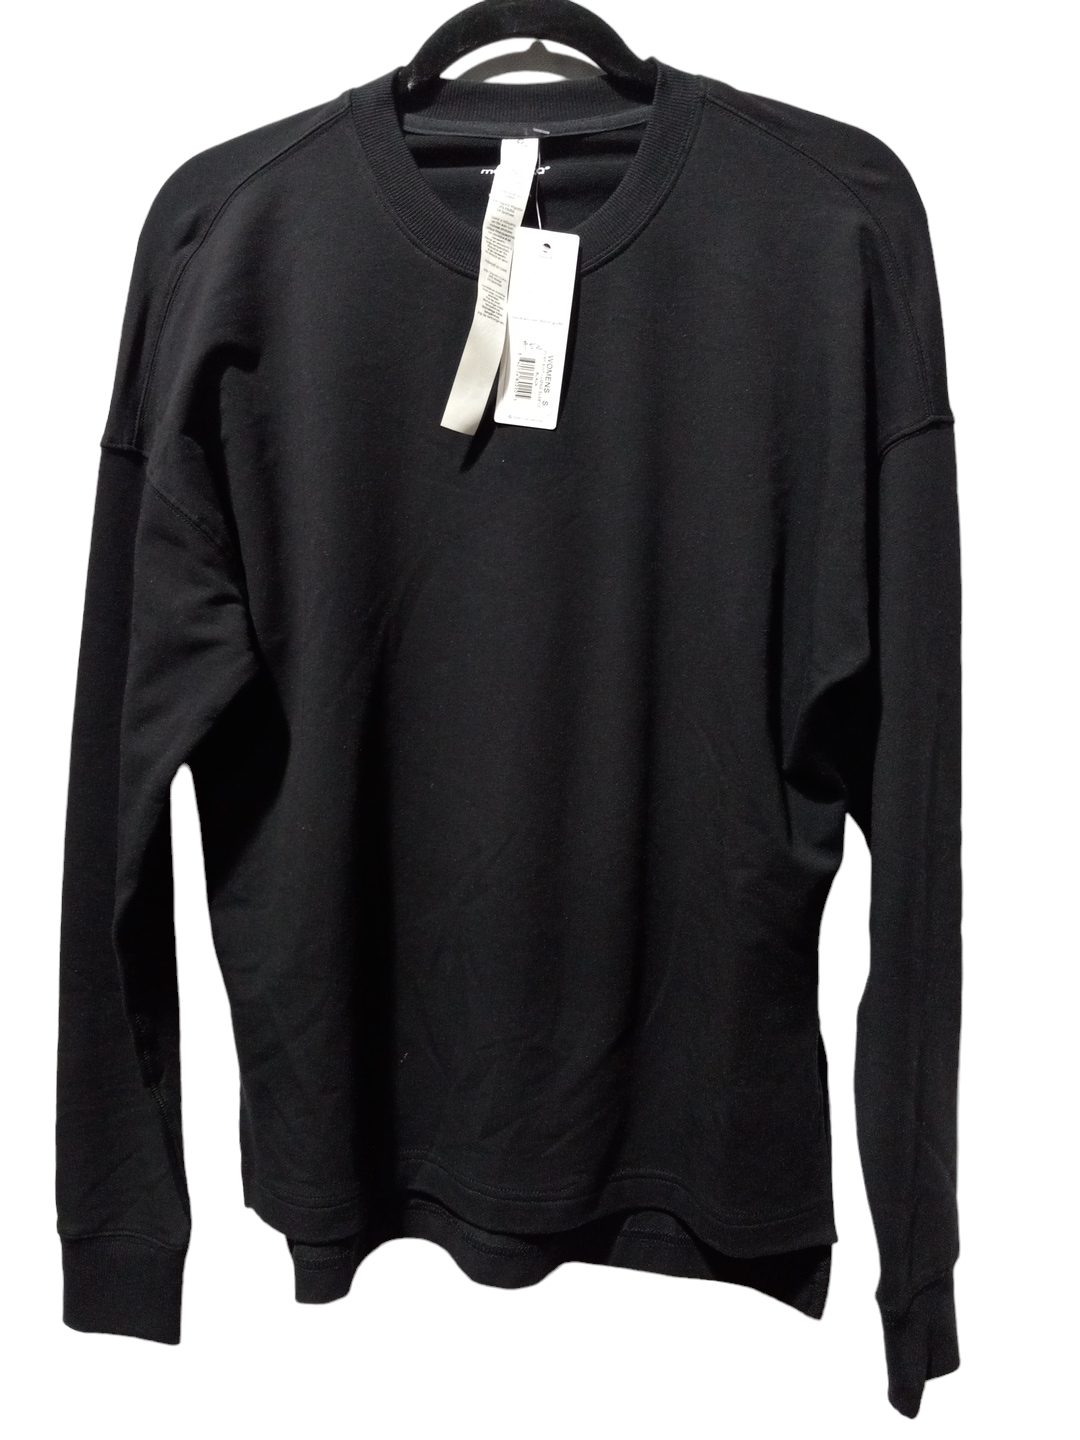 Black Athletic Top Long Sleeve Crewneck Clothes Mentor, Size S